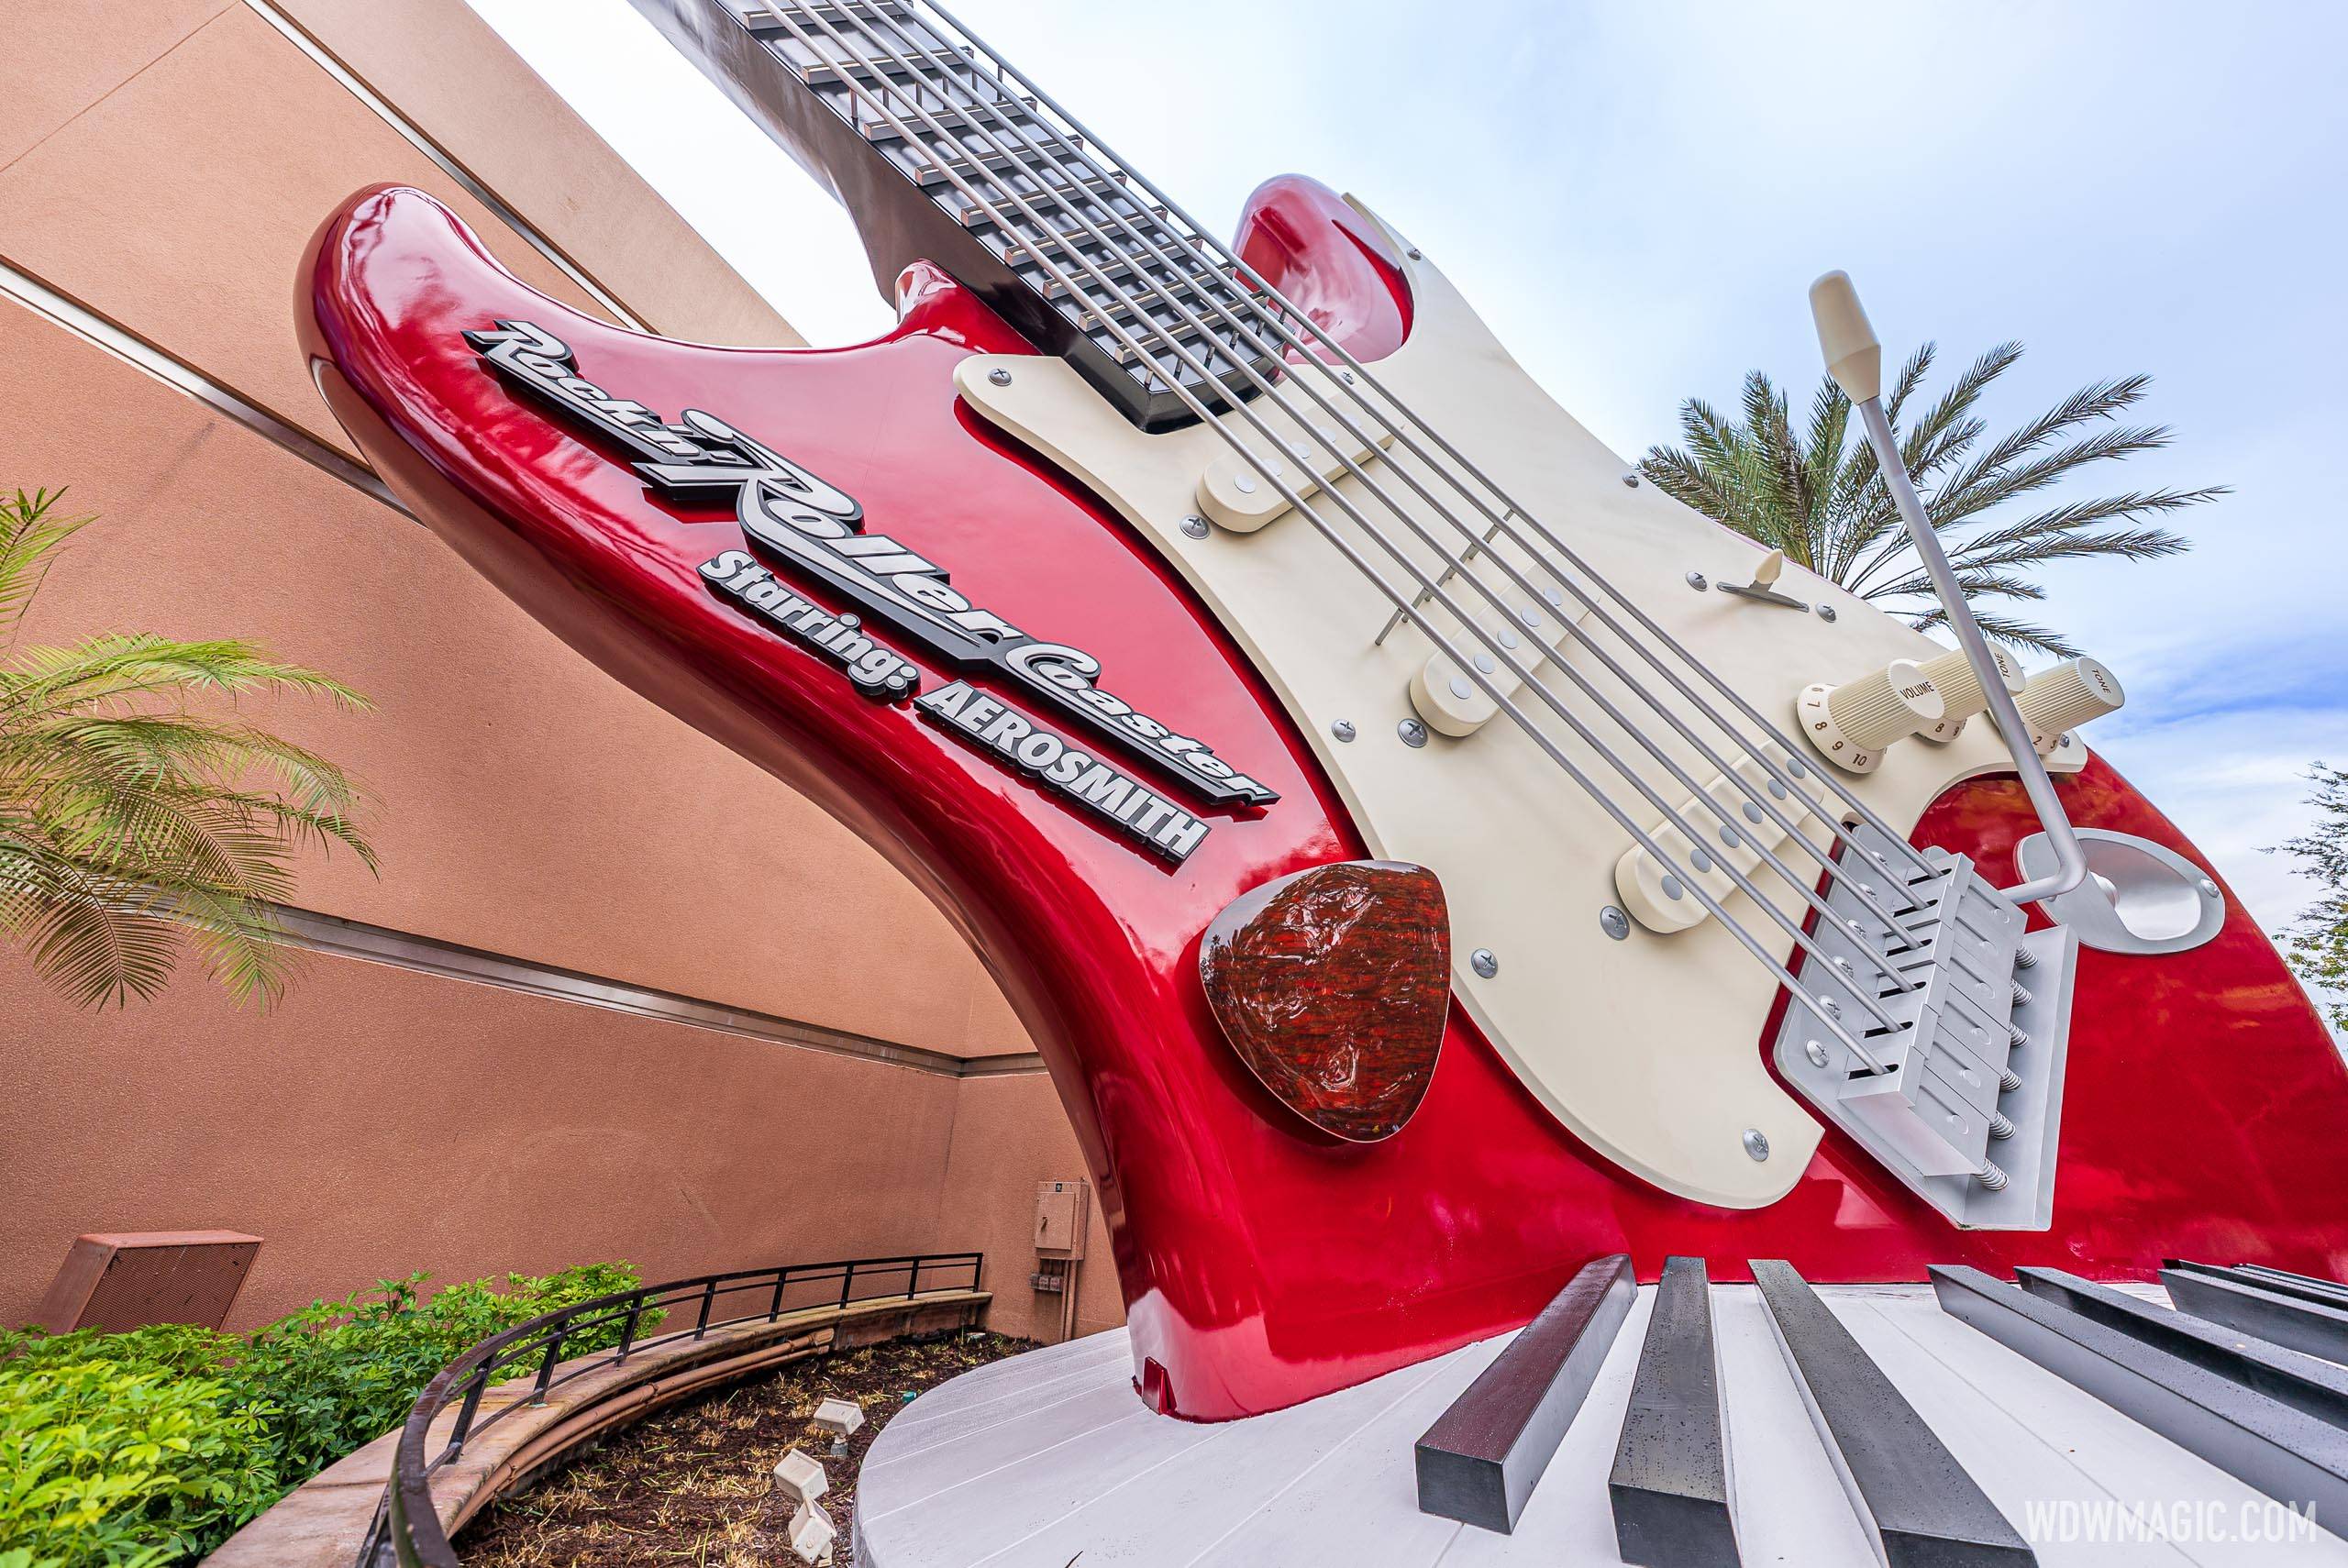 Rock 'n' Roller Coaster at Disney's Hollywood Studios has been frequently closed due to technical problems